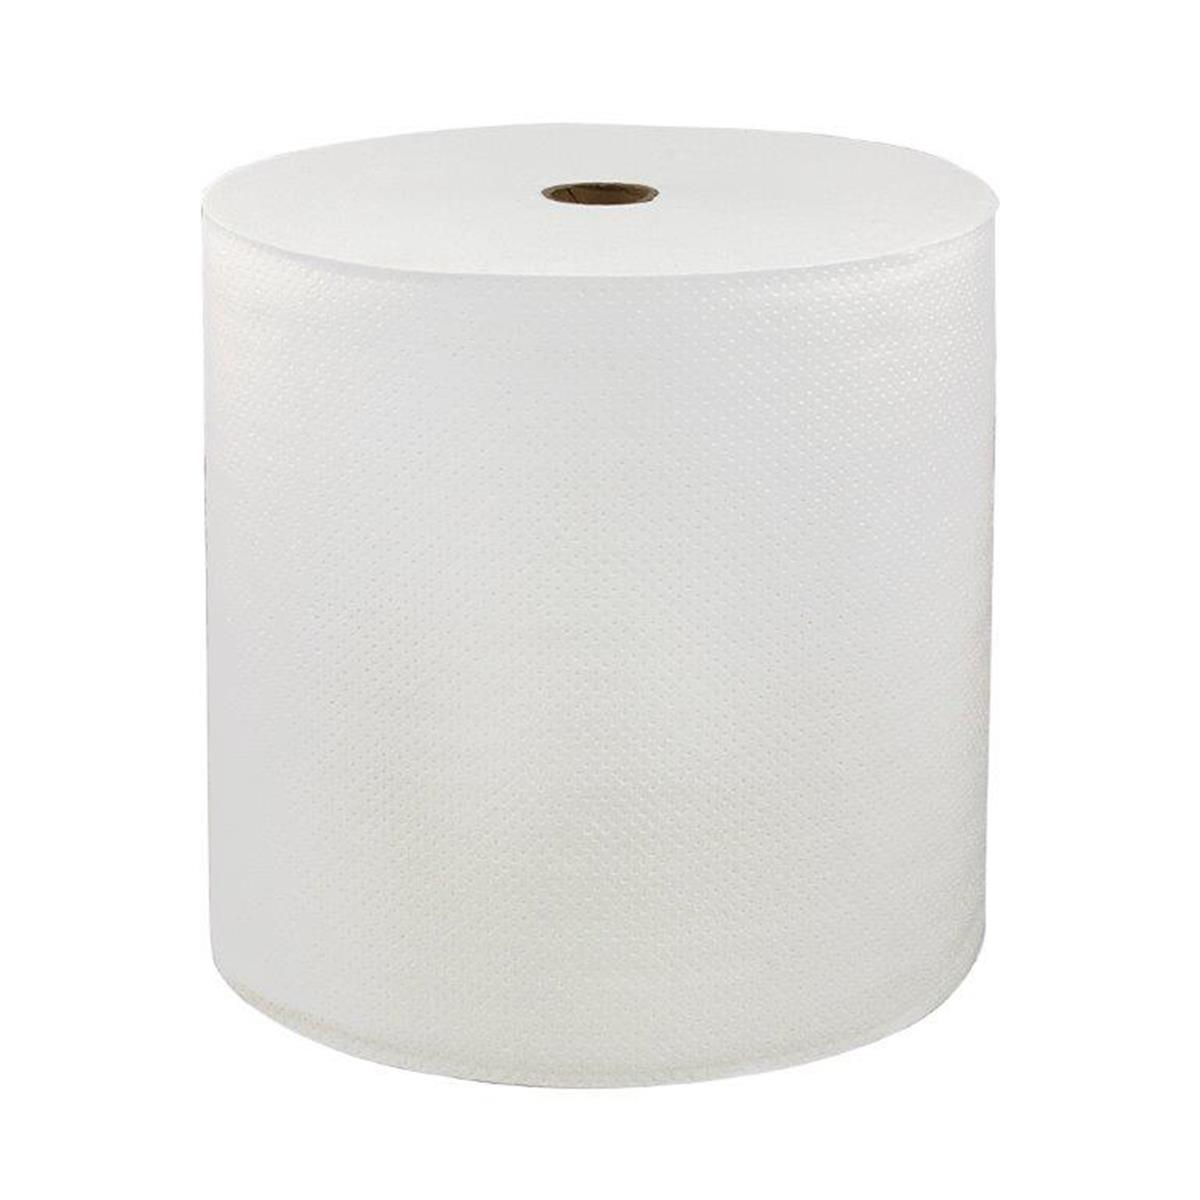 46898 Pec 7 X 850 In. White Livi Hard Wound Roll Towel - Pack Of 6